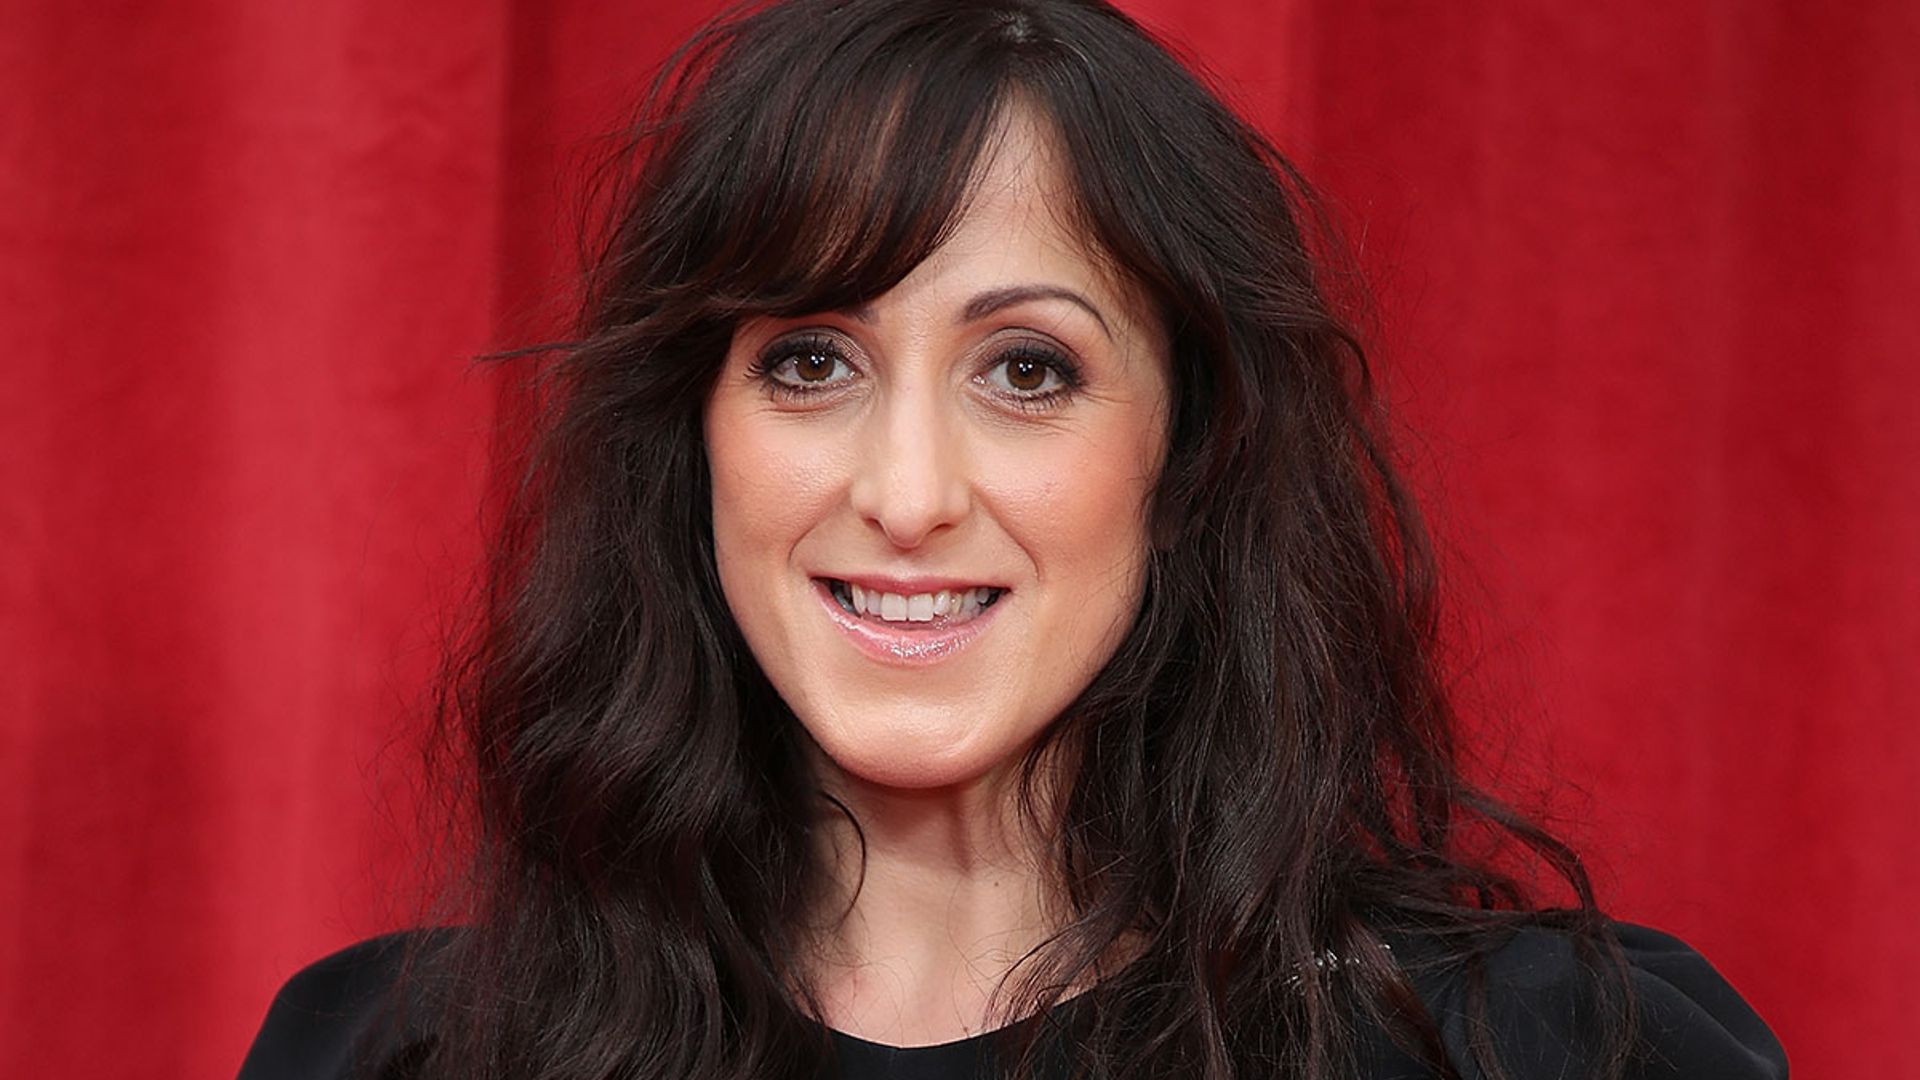 EastEnders star Natalie Cassidy caught in hilarious case of mistaken identity